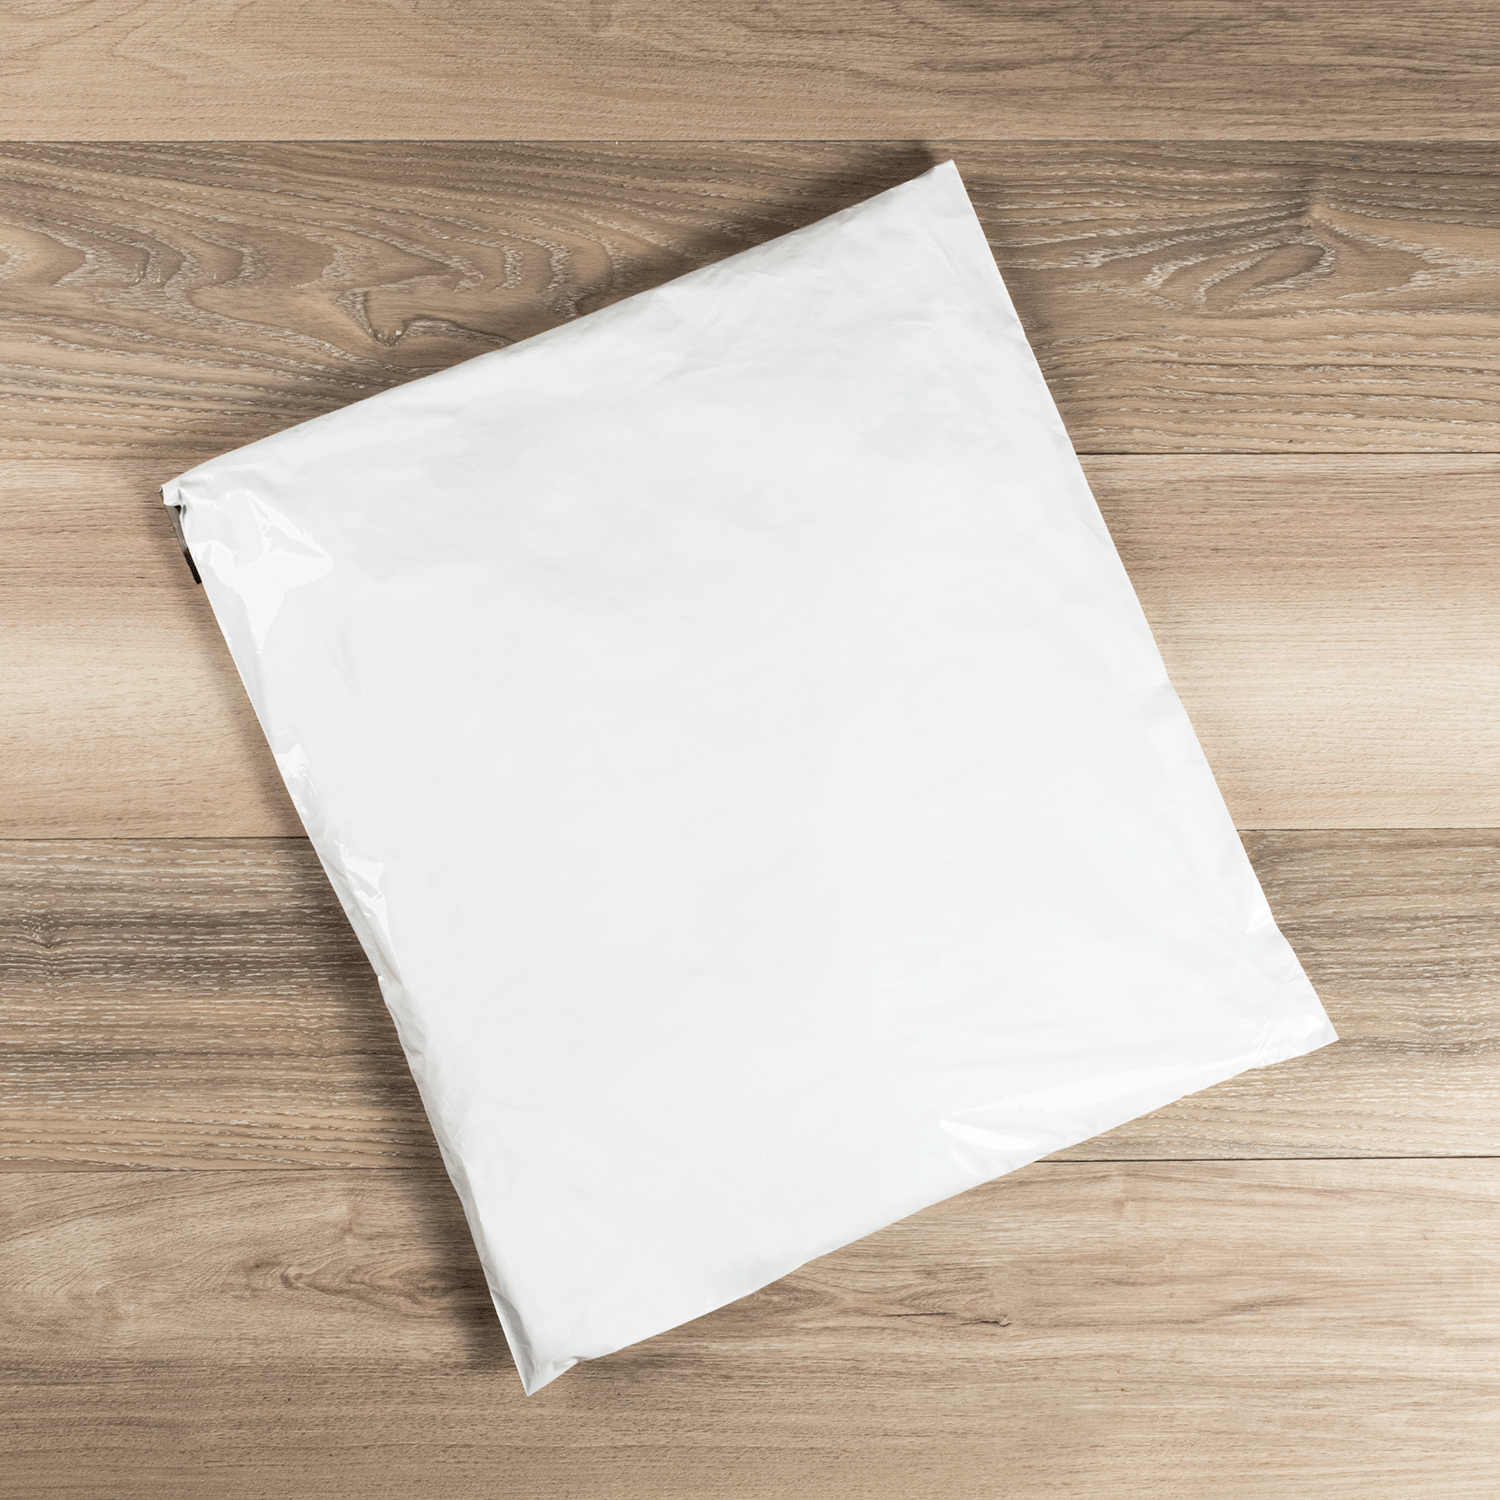 Karat 15.75''x17.33" Poly Mailers with Tamper-Evident Adhesive Closure, White - 500 pcs